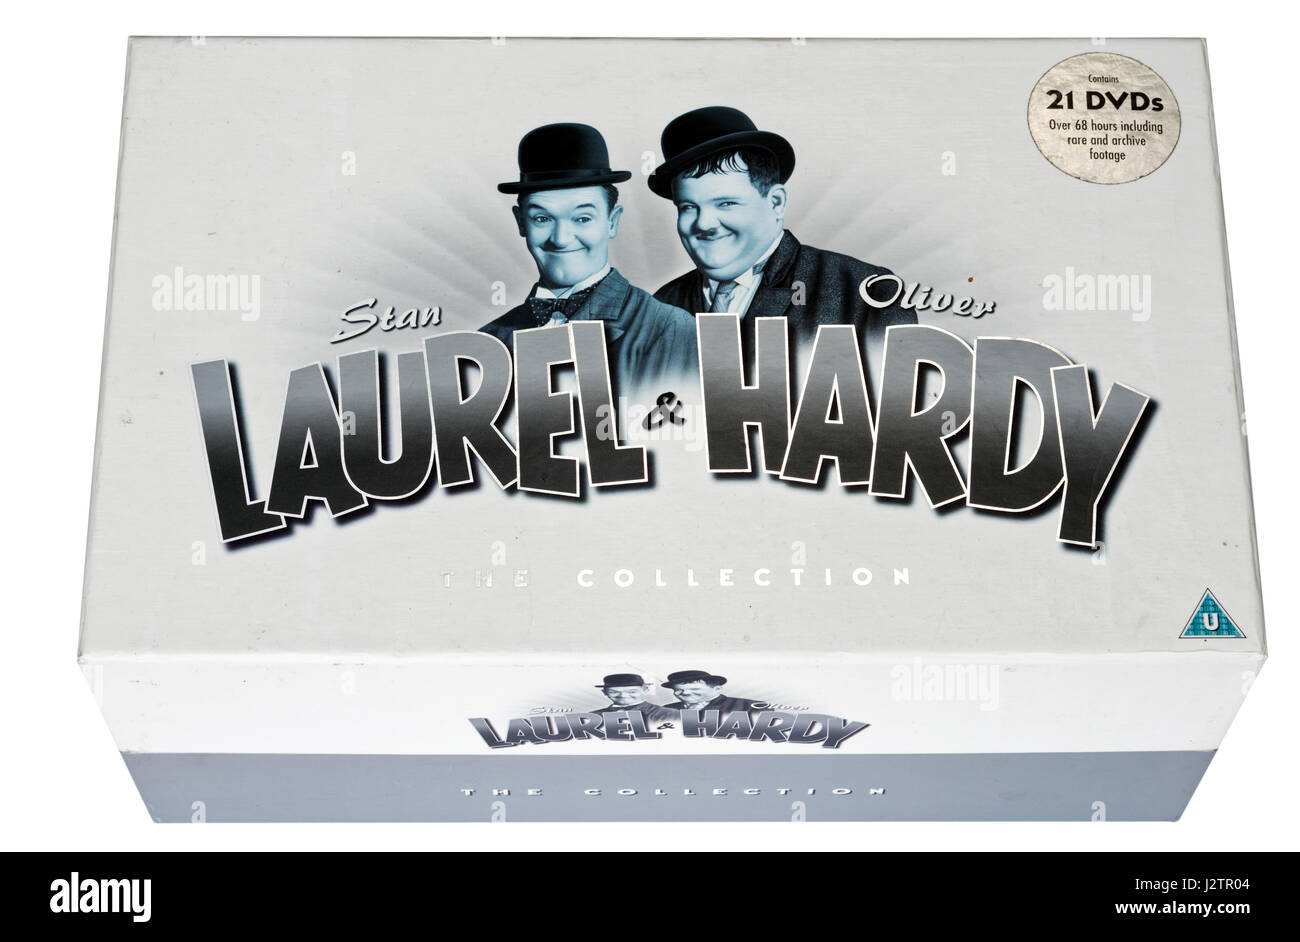 Laurel and Hardy Complete Collection DVD Box Set Stock Photo - Alamy